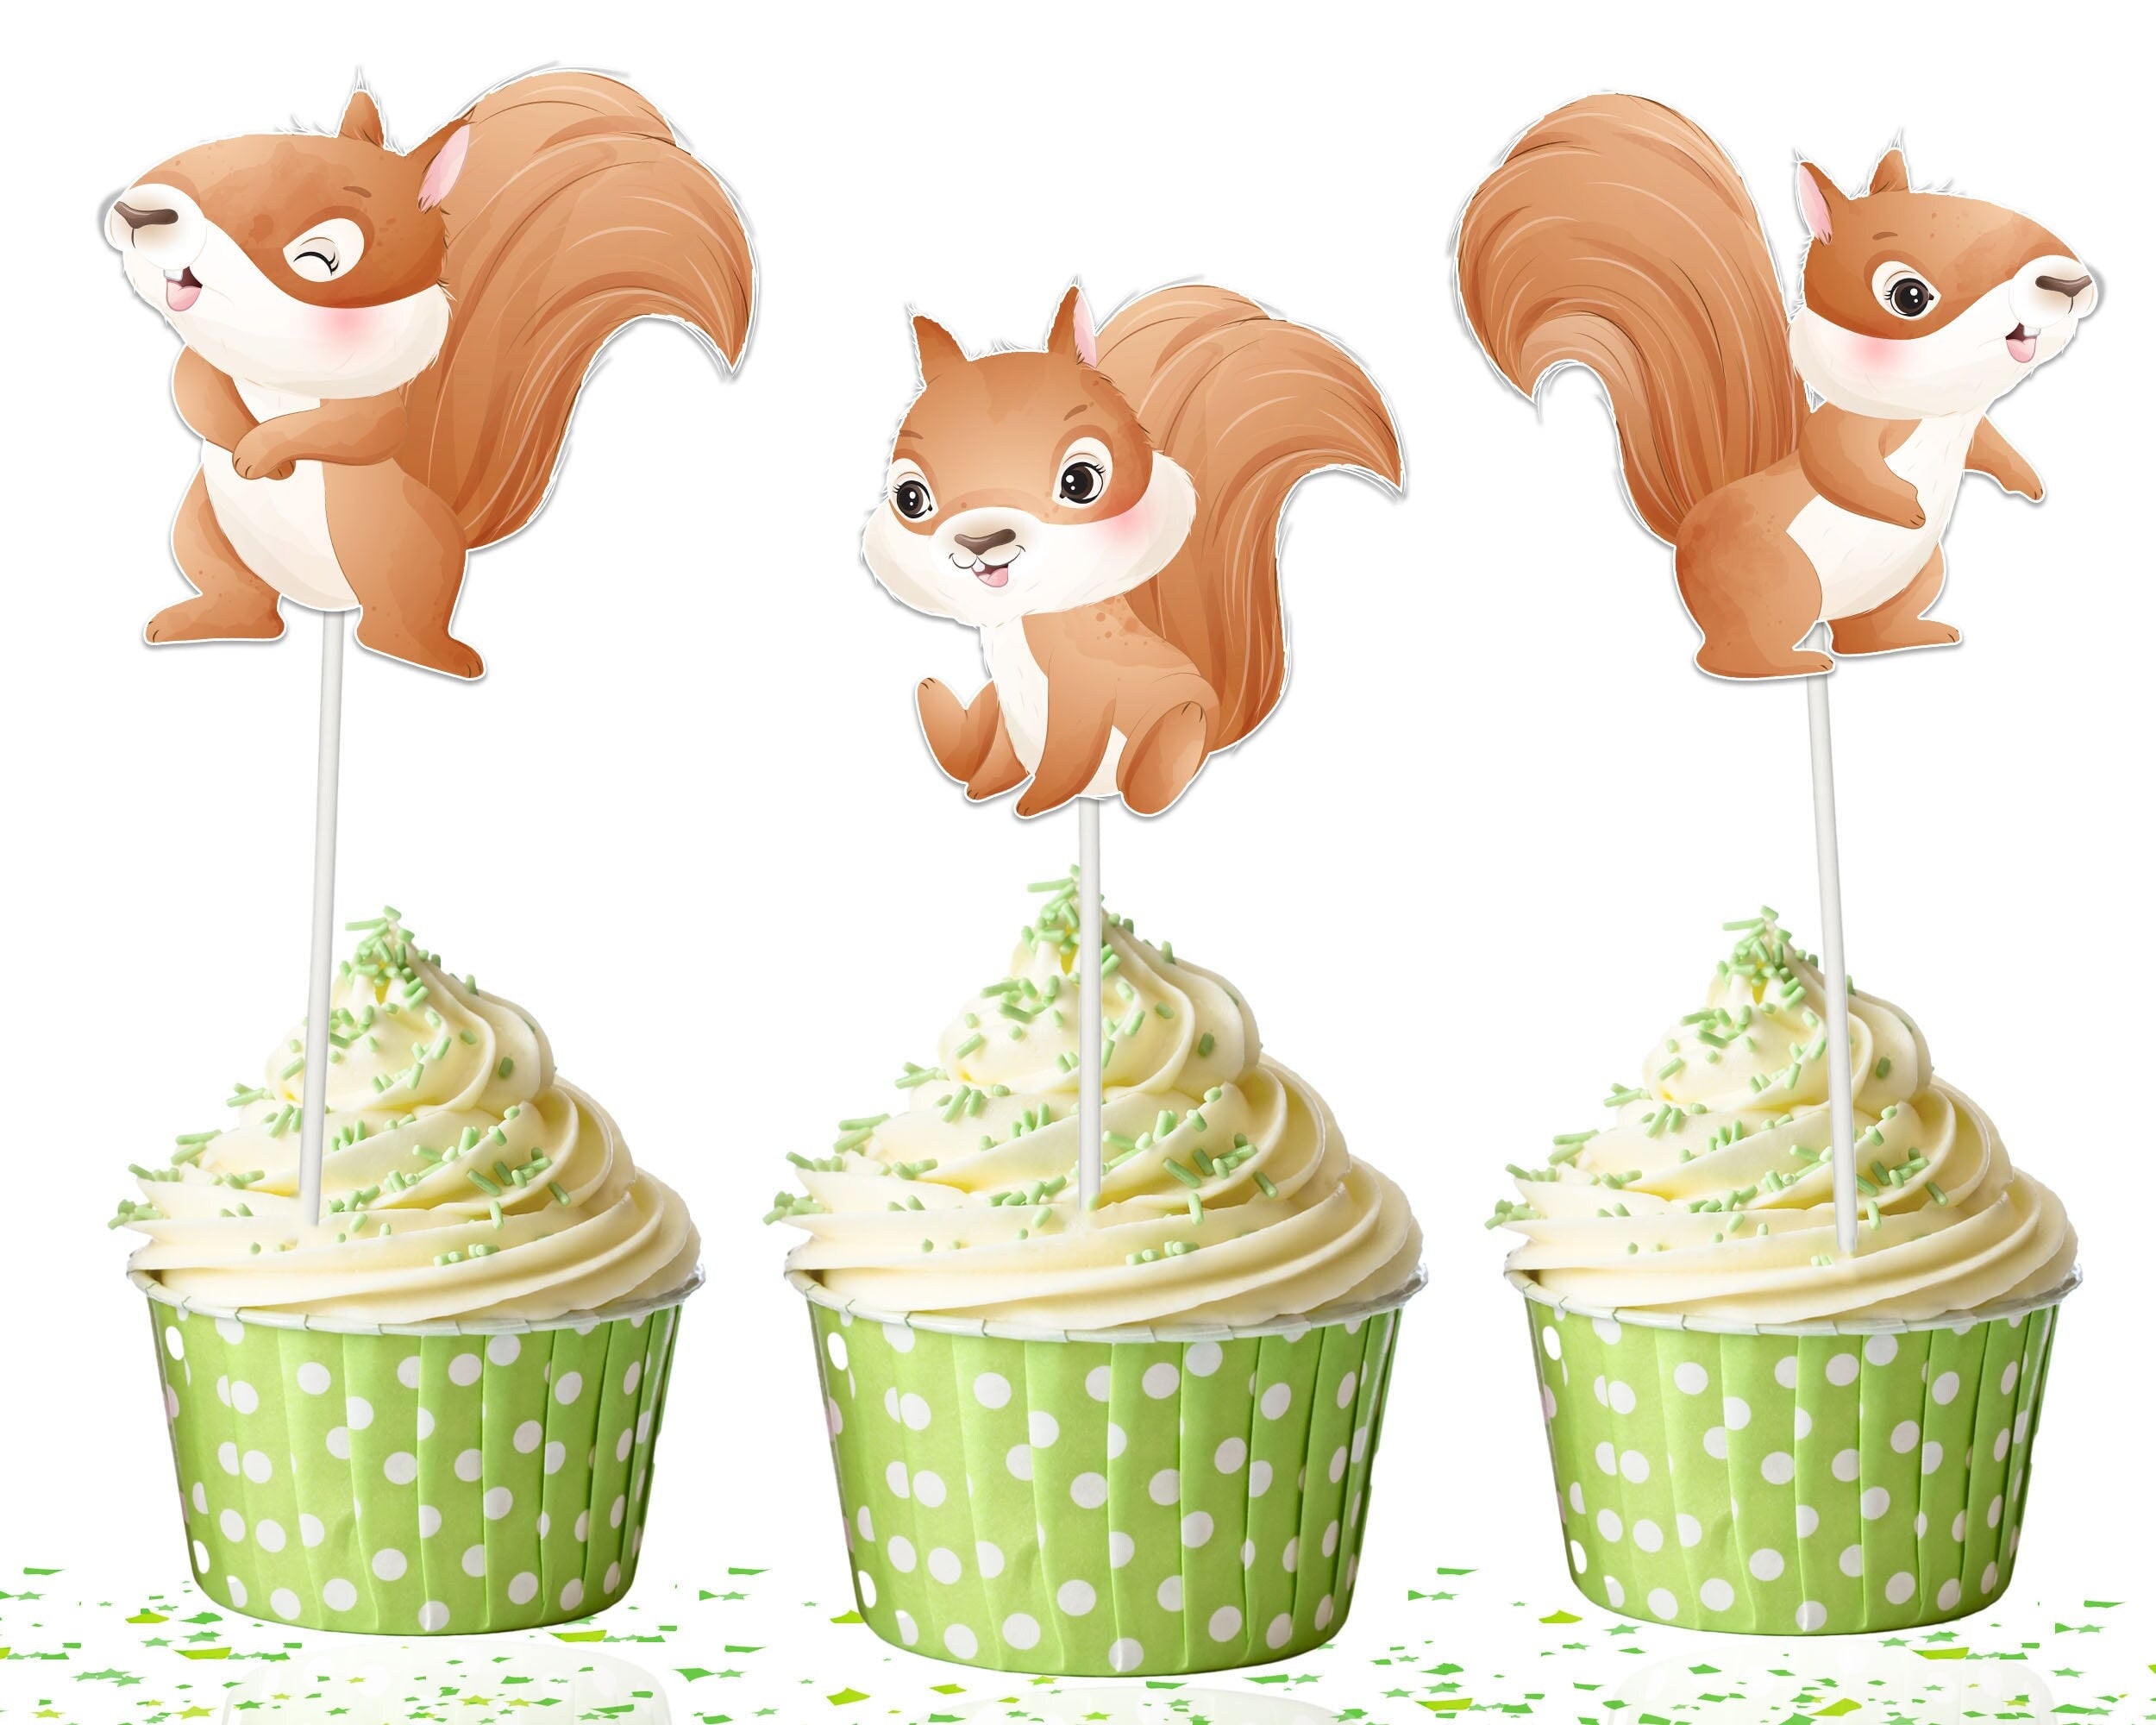 Charming Squirrel Cupcake Toppers - Bring a Whimsical Forest Touch to Your Desserts